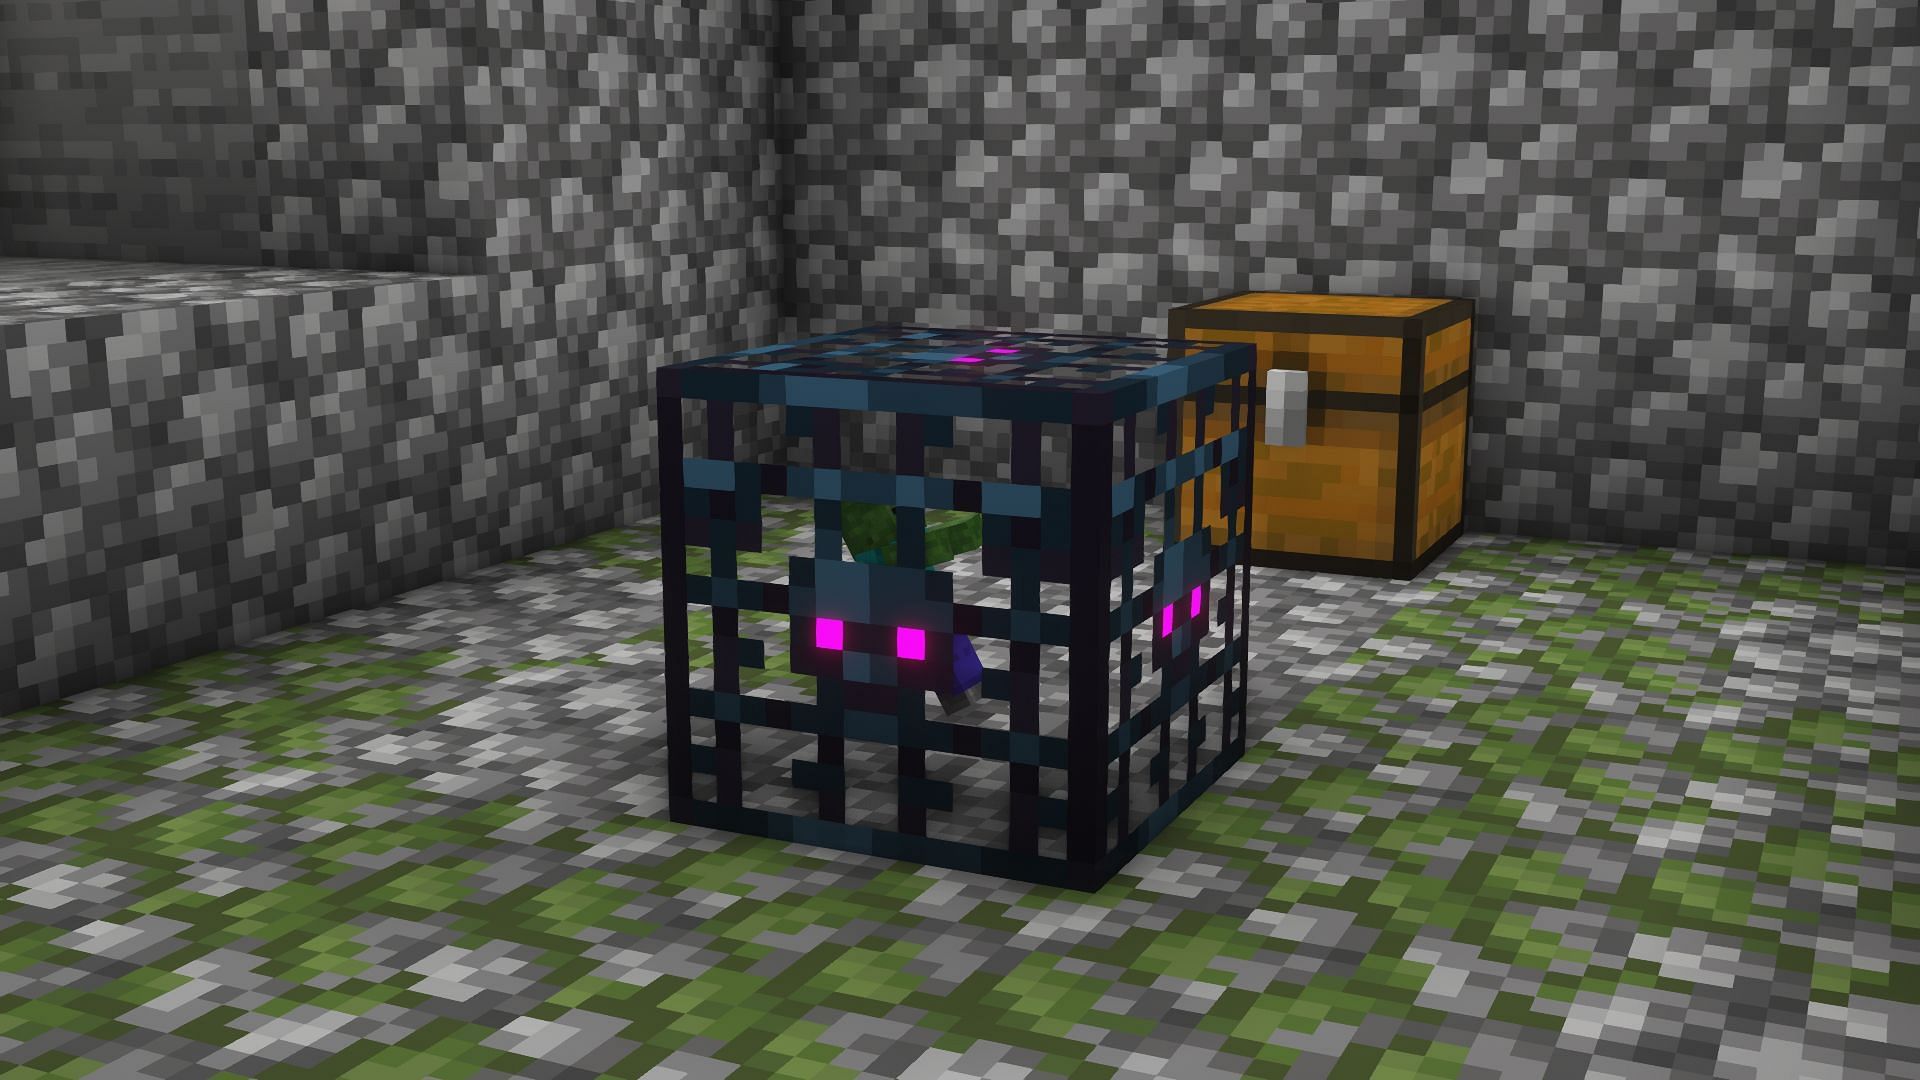 A zombie spawner in a dungeon (Image via Mojang)